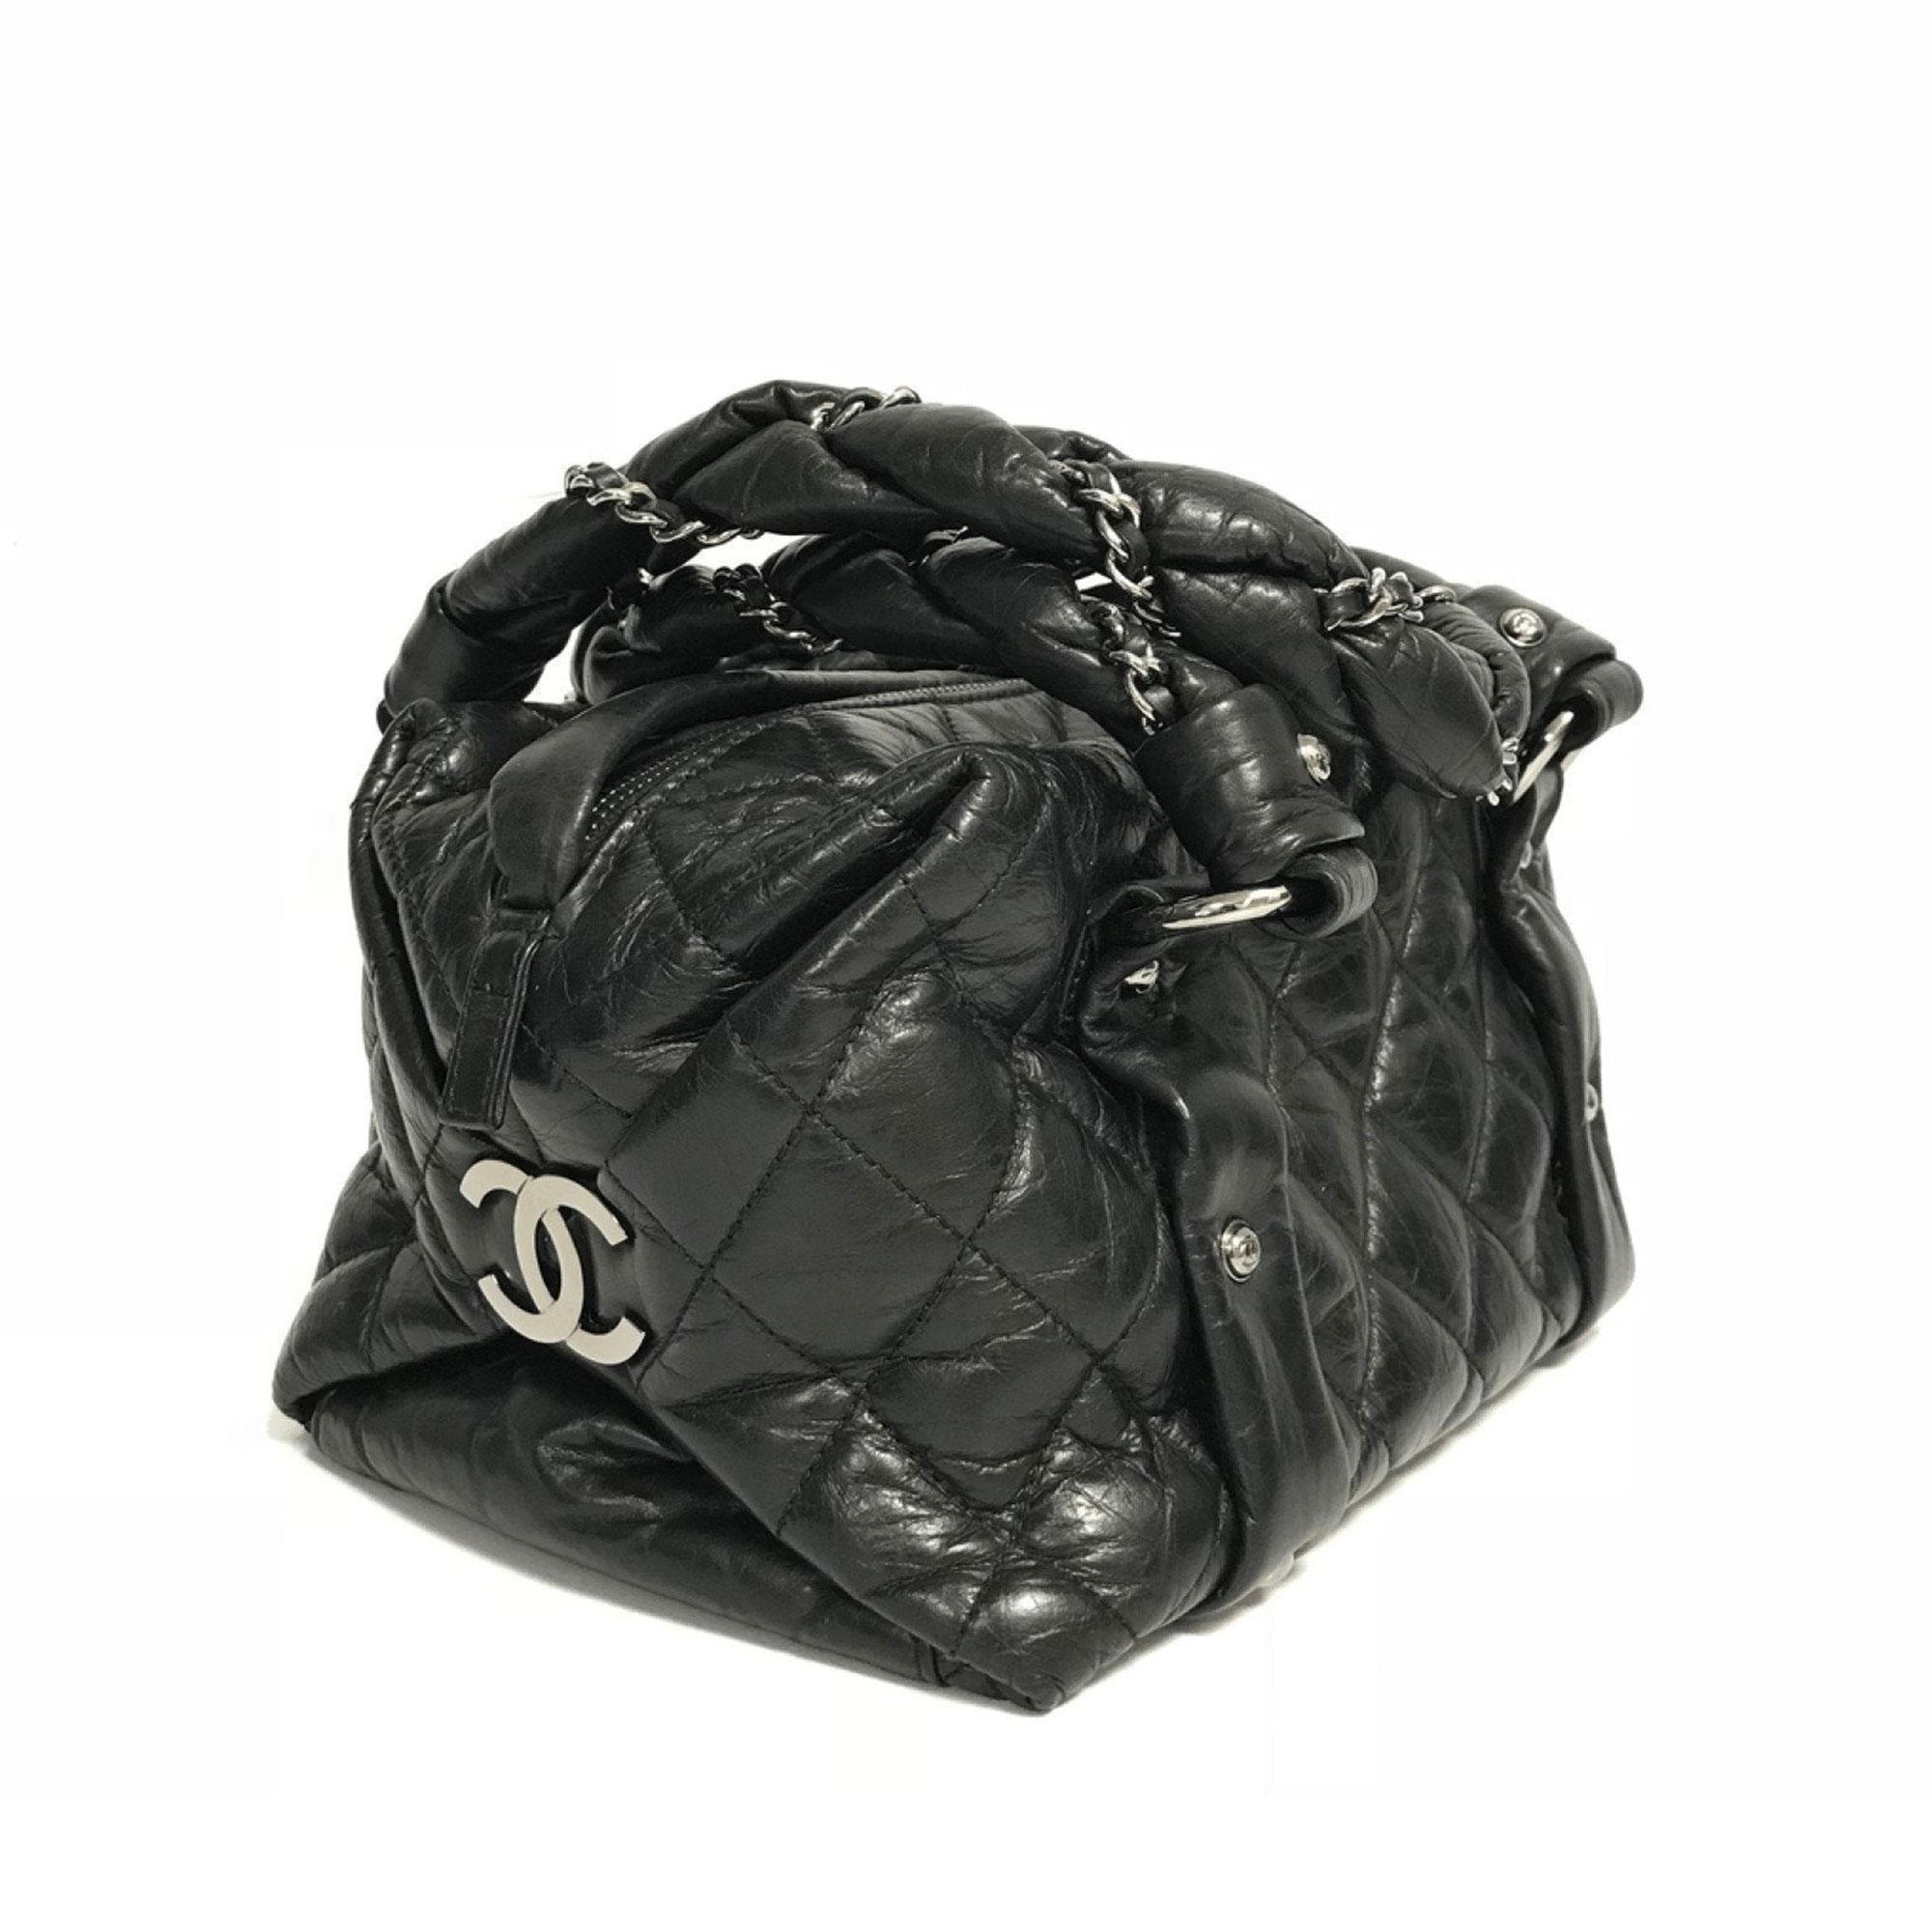 Chanel 2006 Distressed Soft Bubble Mini Bowler Tote aus Kalbsleder im Used-Look  im Angebot 2